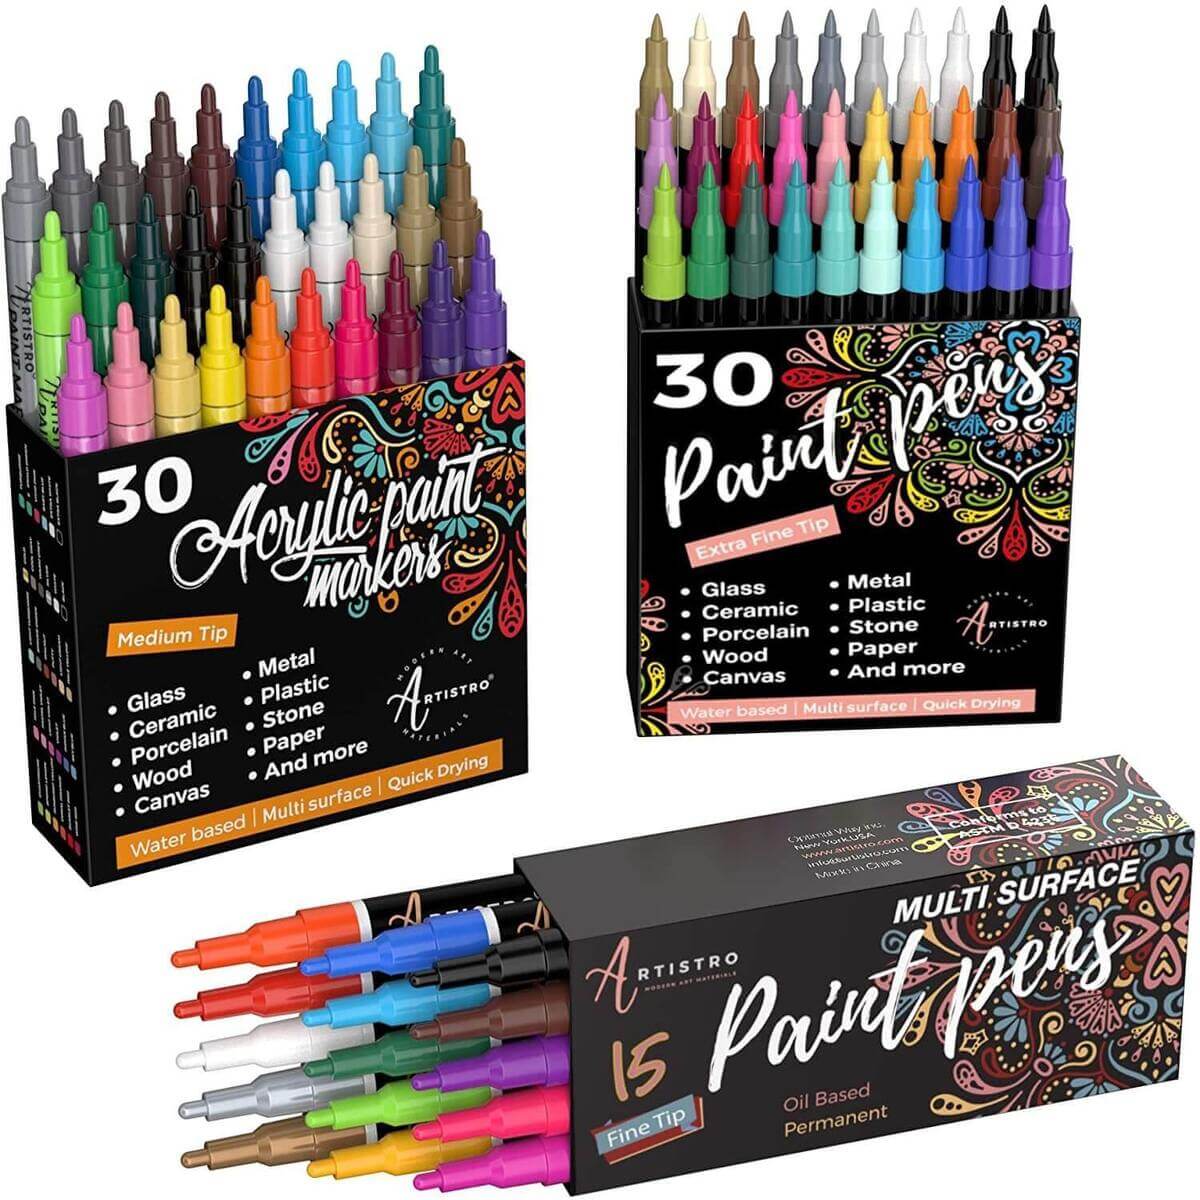 60 Artistro Markers for Art | 30 Acrylic Extra Fine Tip Paint Pens + 30 Acrylic Medium Tip Paint Pens for Rock, Wood, Glass, Ceramic, Metal Painting